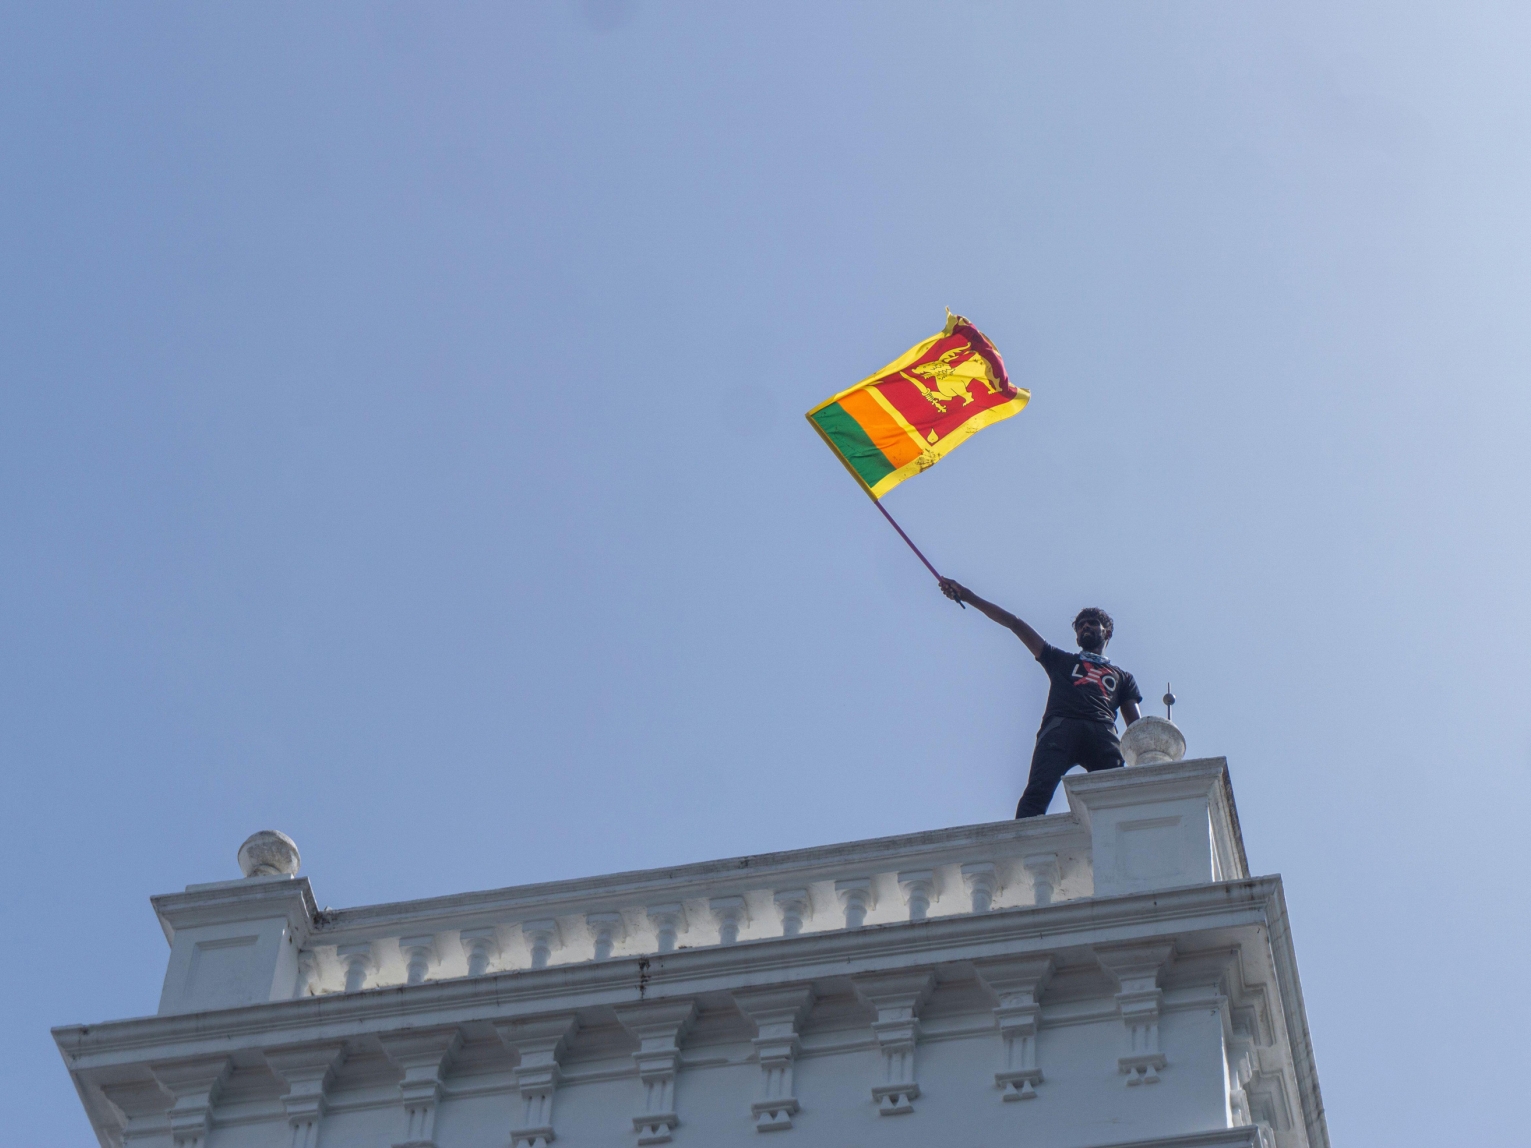 A protester waves a Sri Lankan flag while standing atop prime minister Ranil Wickremesinghe's office in Colombo on July 13, 2022. Hundreds of protesters stormed the office amid the deep political and economic crisis in the country which led to months of widespread protests.